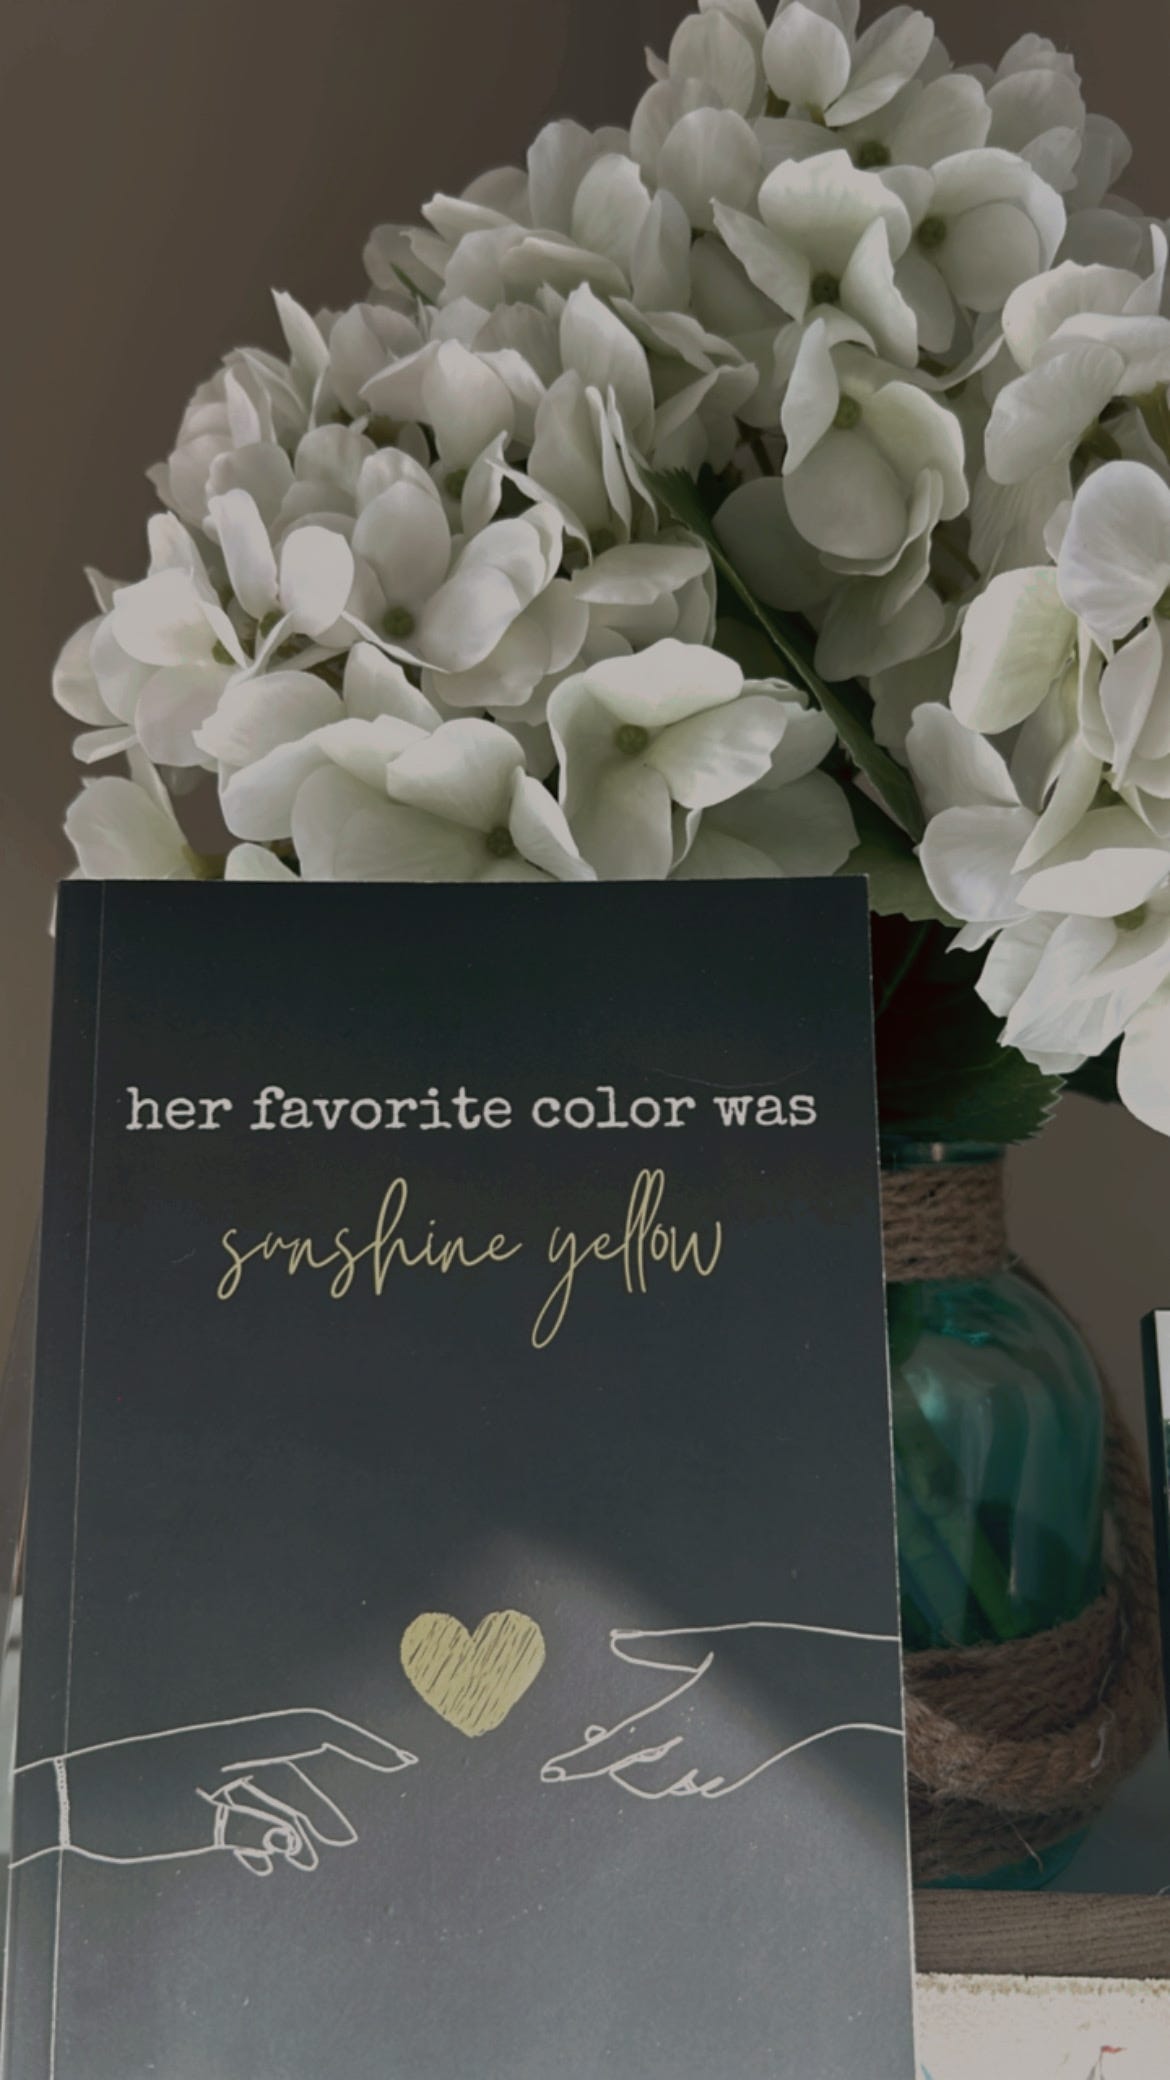 black cover of book with white line drawing of two hands outstretched towards each other with a yellow heart in the middle. title is "her favorite color was sunshine yellow." white hydrangea flowers are in the background in a blue-green vase with brown rope around it as accents.